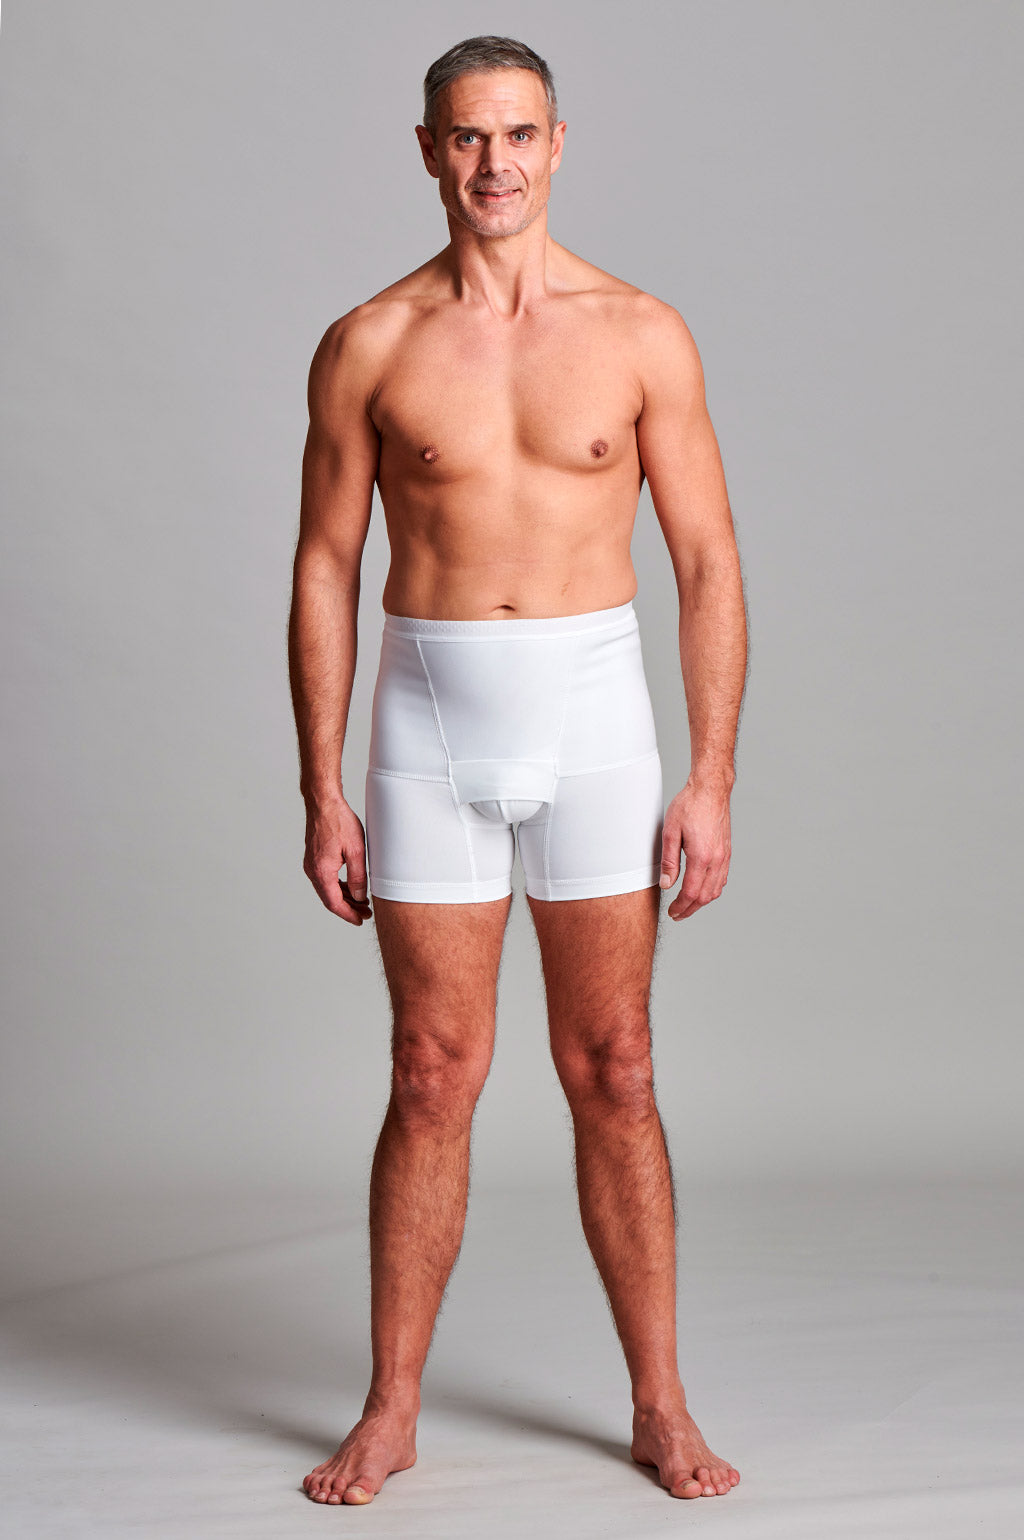 Low Waist Male Support Girdle